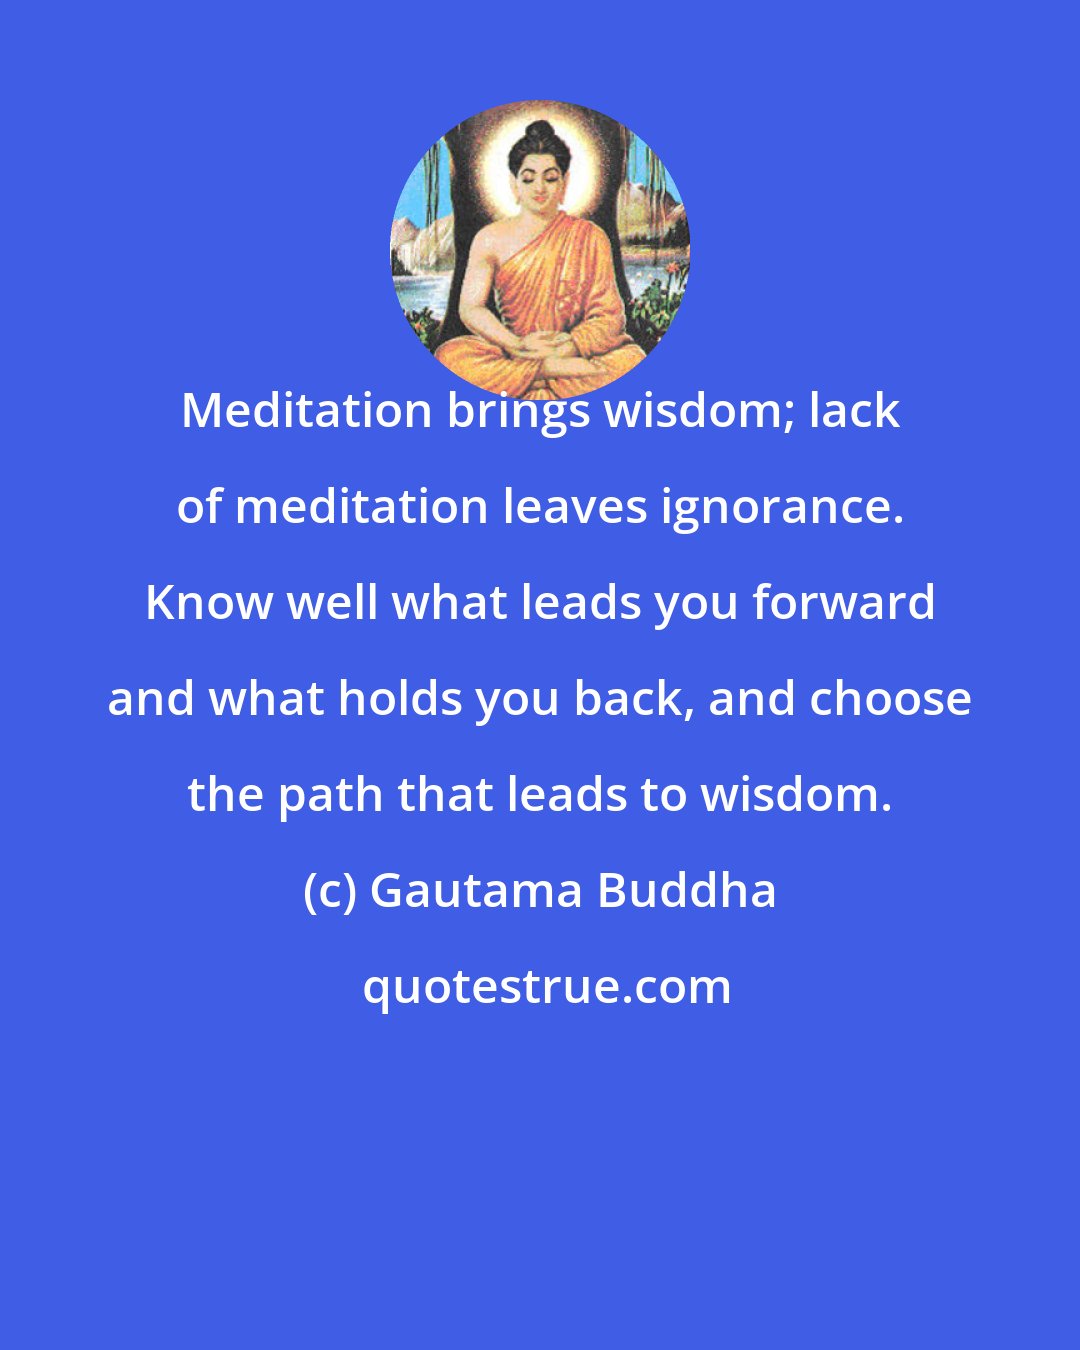 Gautama Buddha: Meditation brings wisdom; lack of meditation leaves ignorance. Know well what leads you forward and what holds you back, and choose the path that leads to wisdom.